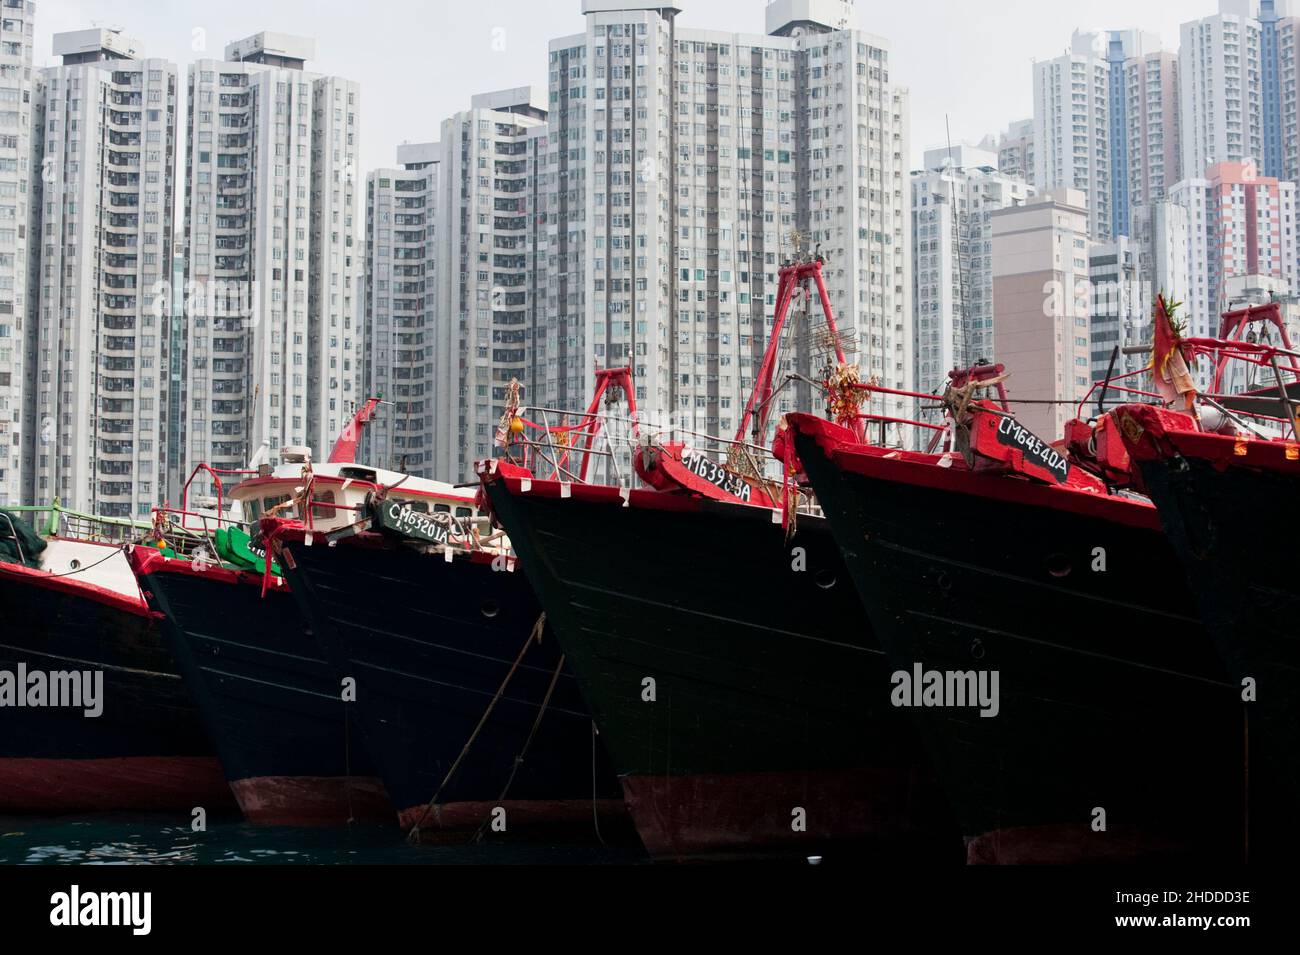 Boats and buildings around the Aberdeen Harbour, Hong Kong Stock Photo